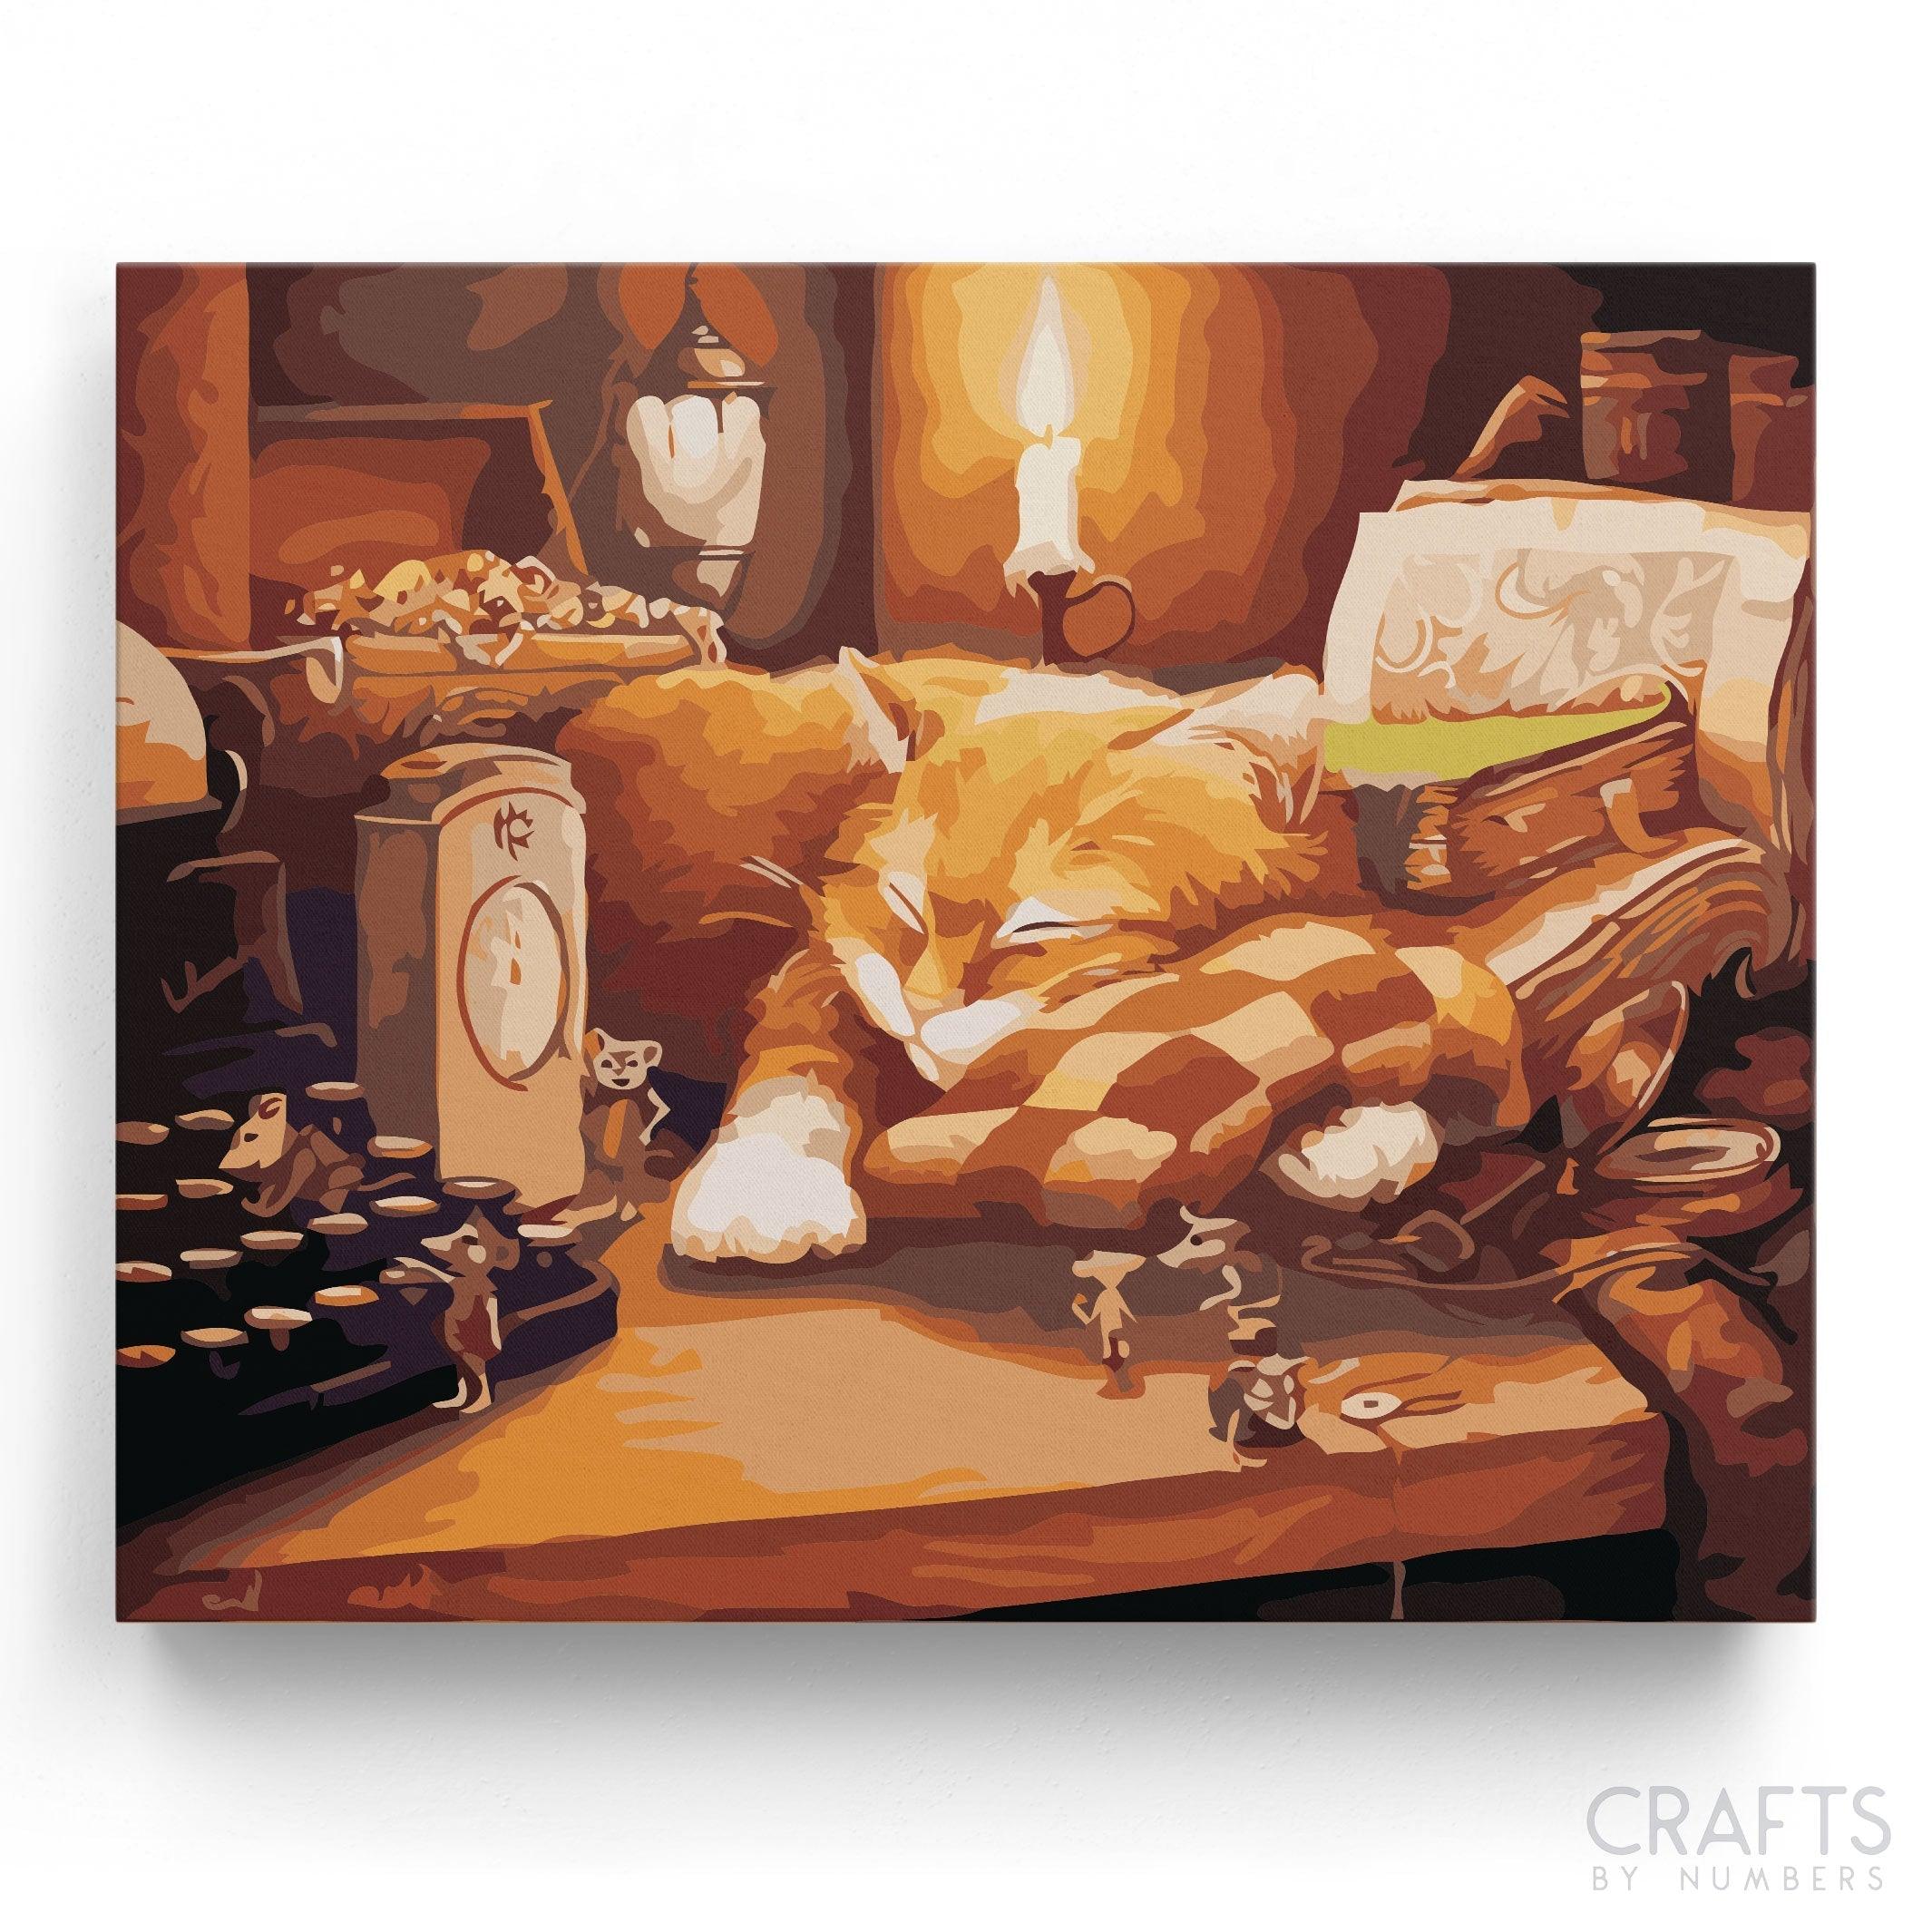 Sleeping Cat – Crafty By Numbers